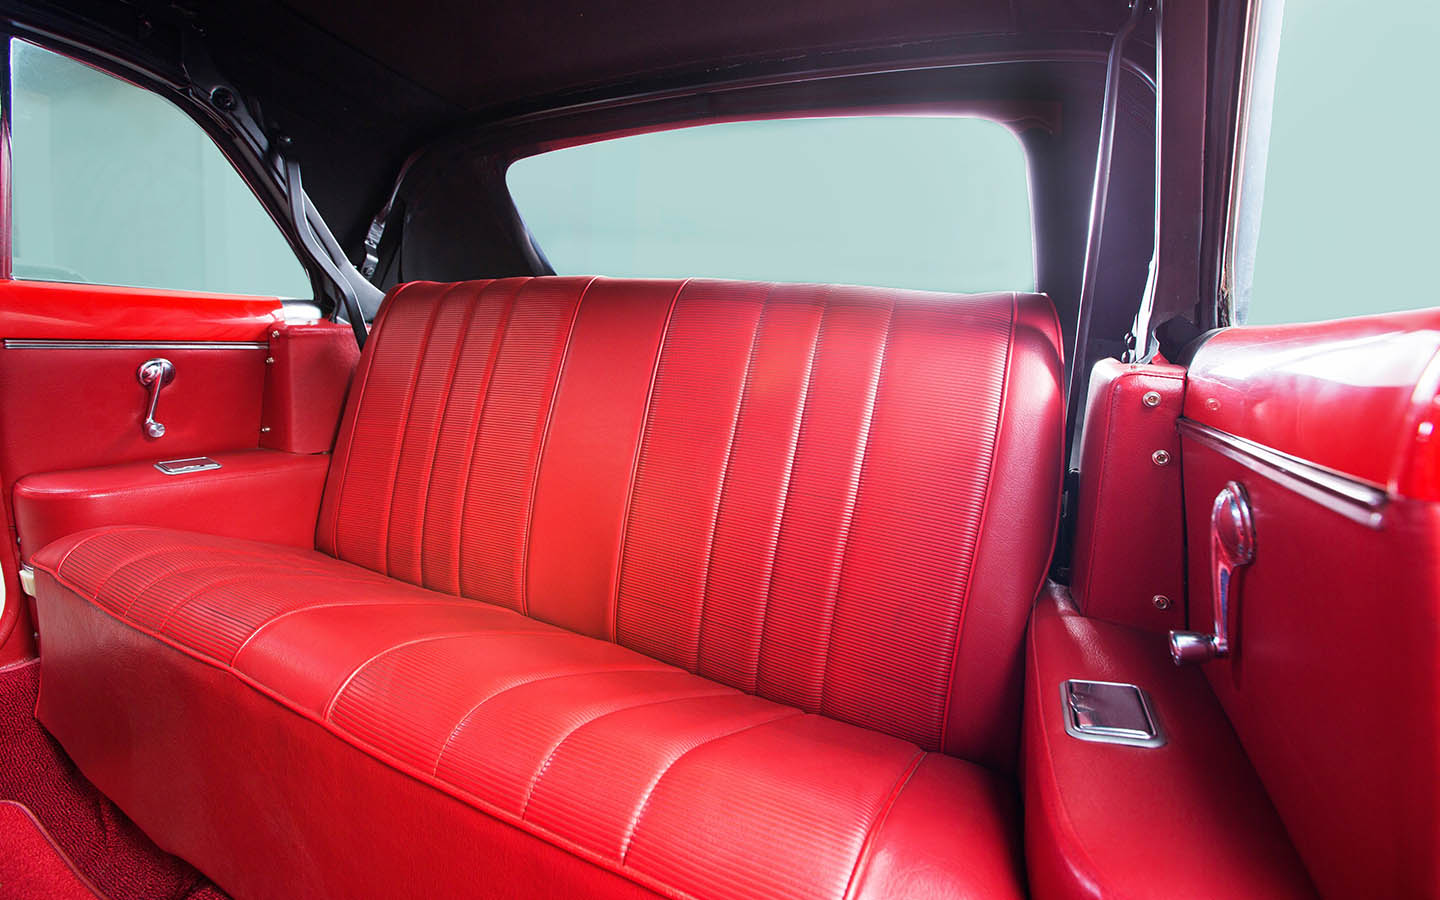 Benches as car seats in older cars